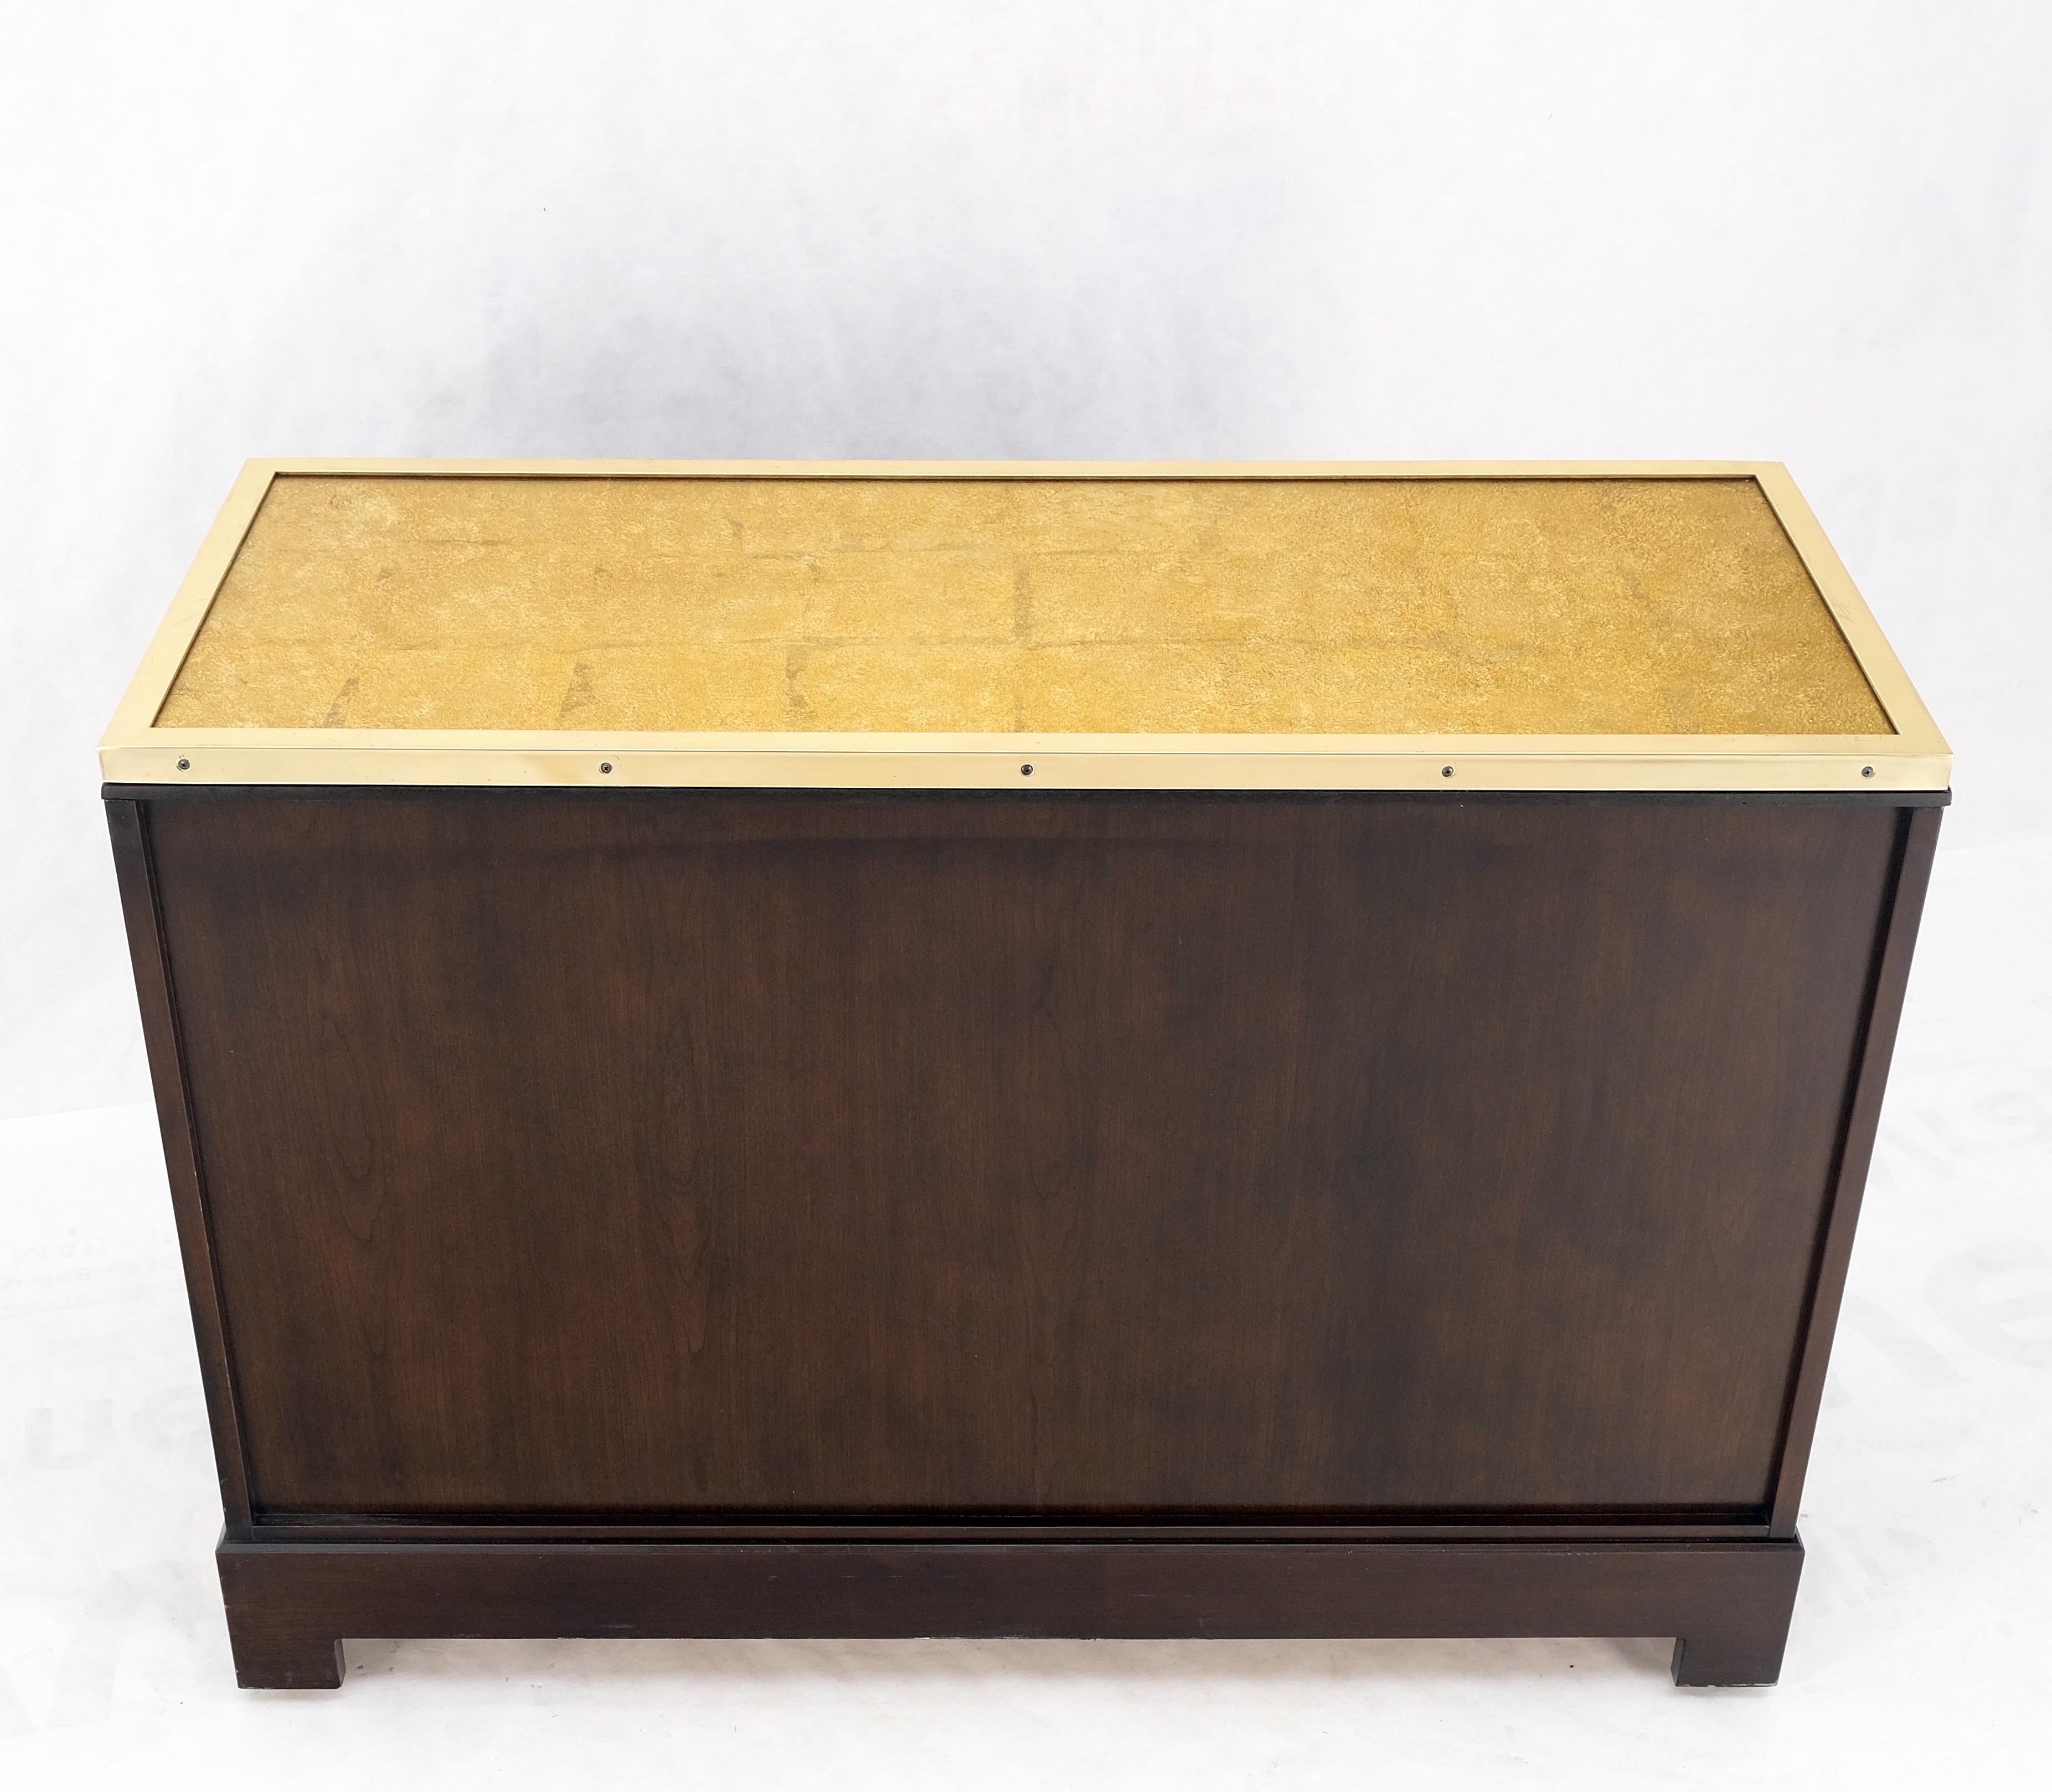 Campaign Style 6 Drawers Brass Drop Pulls Mid-Century Modern Bachelor Chest Mint For Sale 7